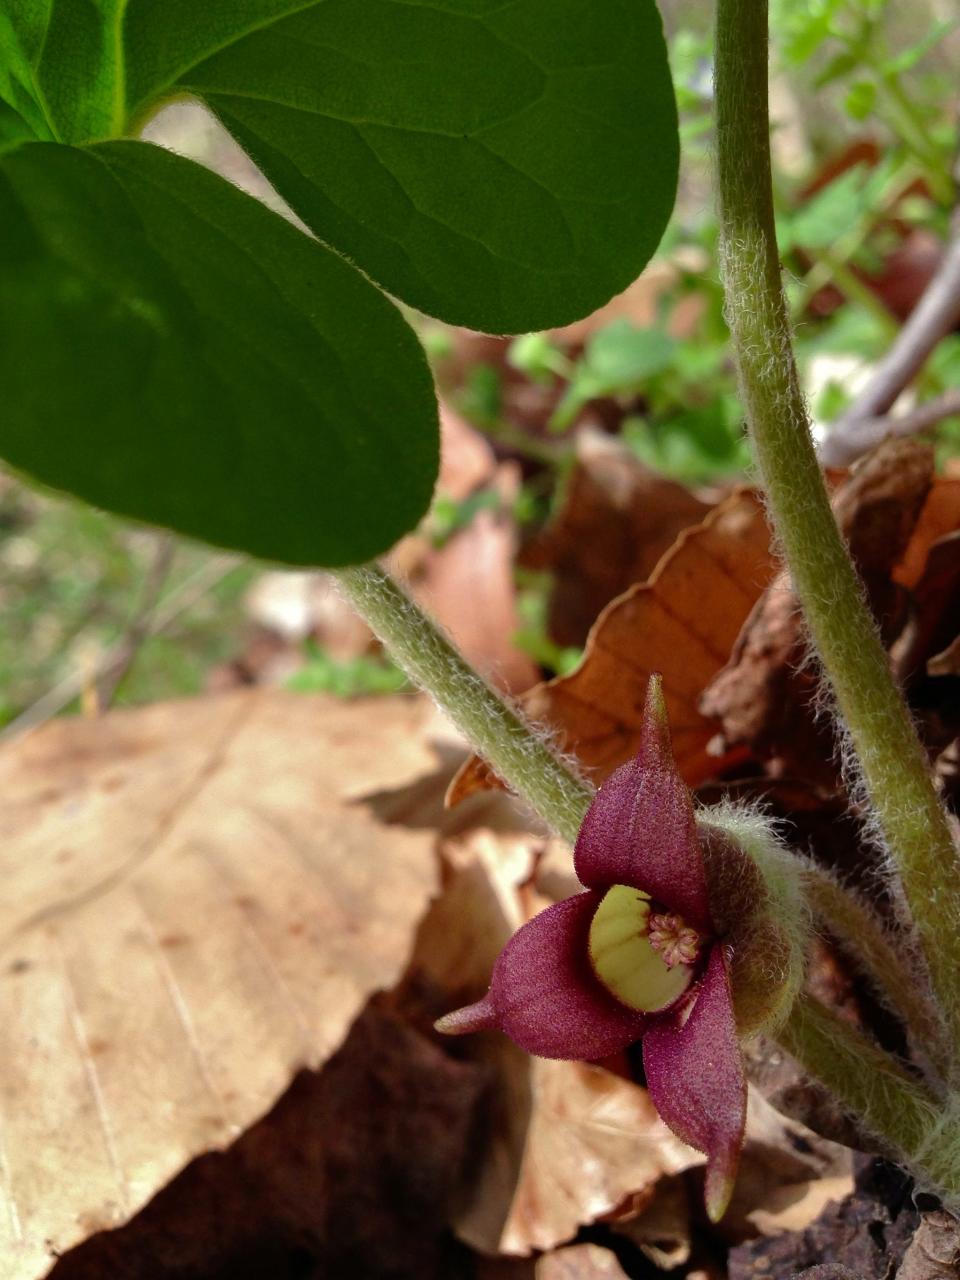 Fragrant purplish-brown flowers bloom before the leaves are fully formed on asarum canadense, also referred to as wild ginger.